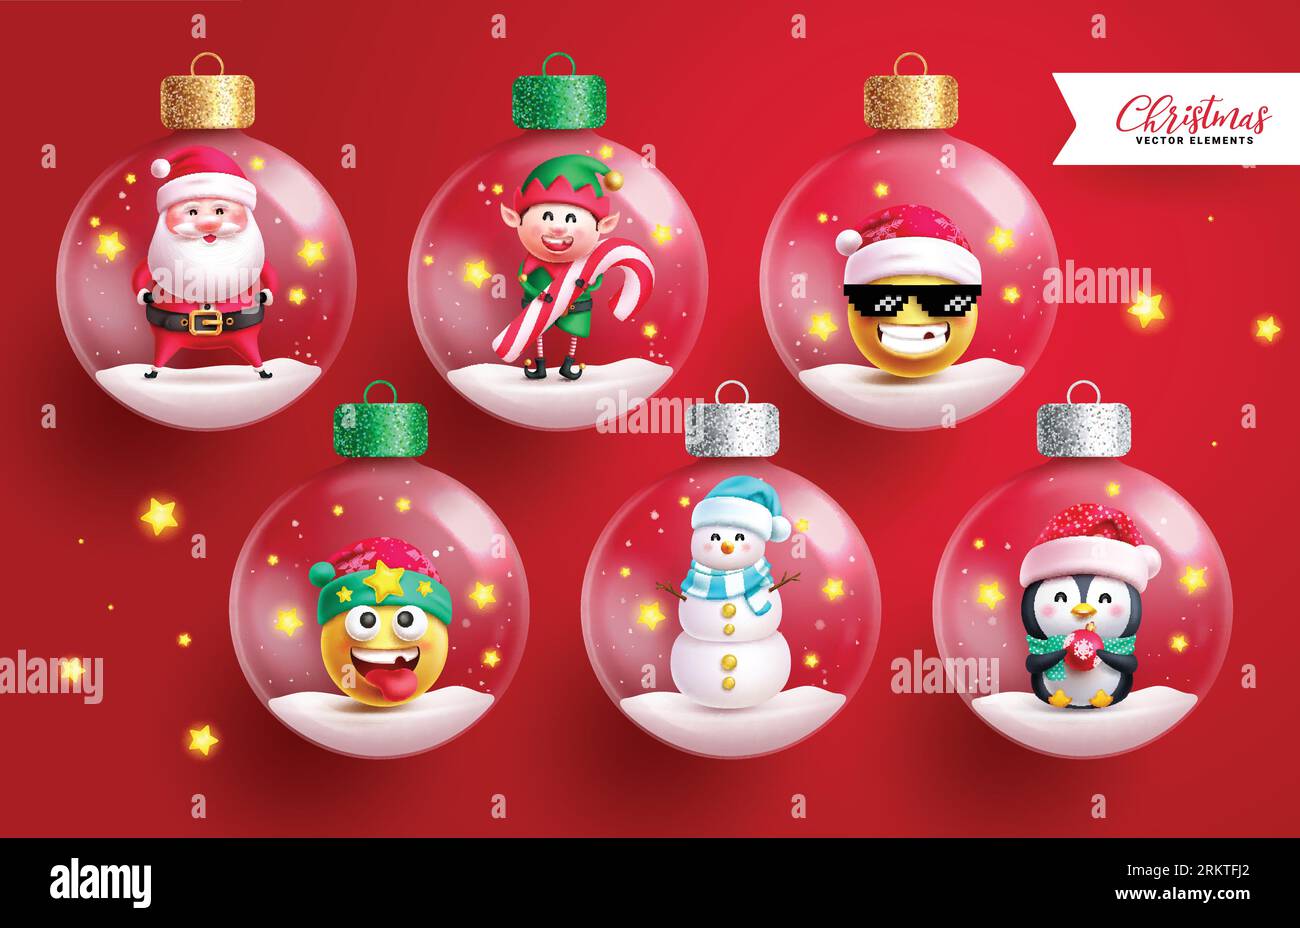 Christmas crystal balls vector set design. Christmas characters in glass balls, sphere, bauble transparent elements in magical red background. Vector Stock Vector